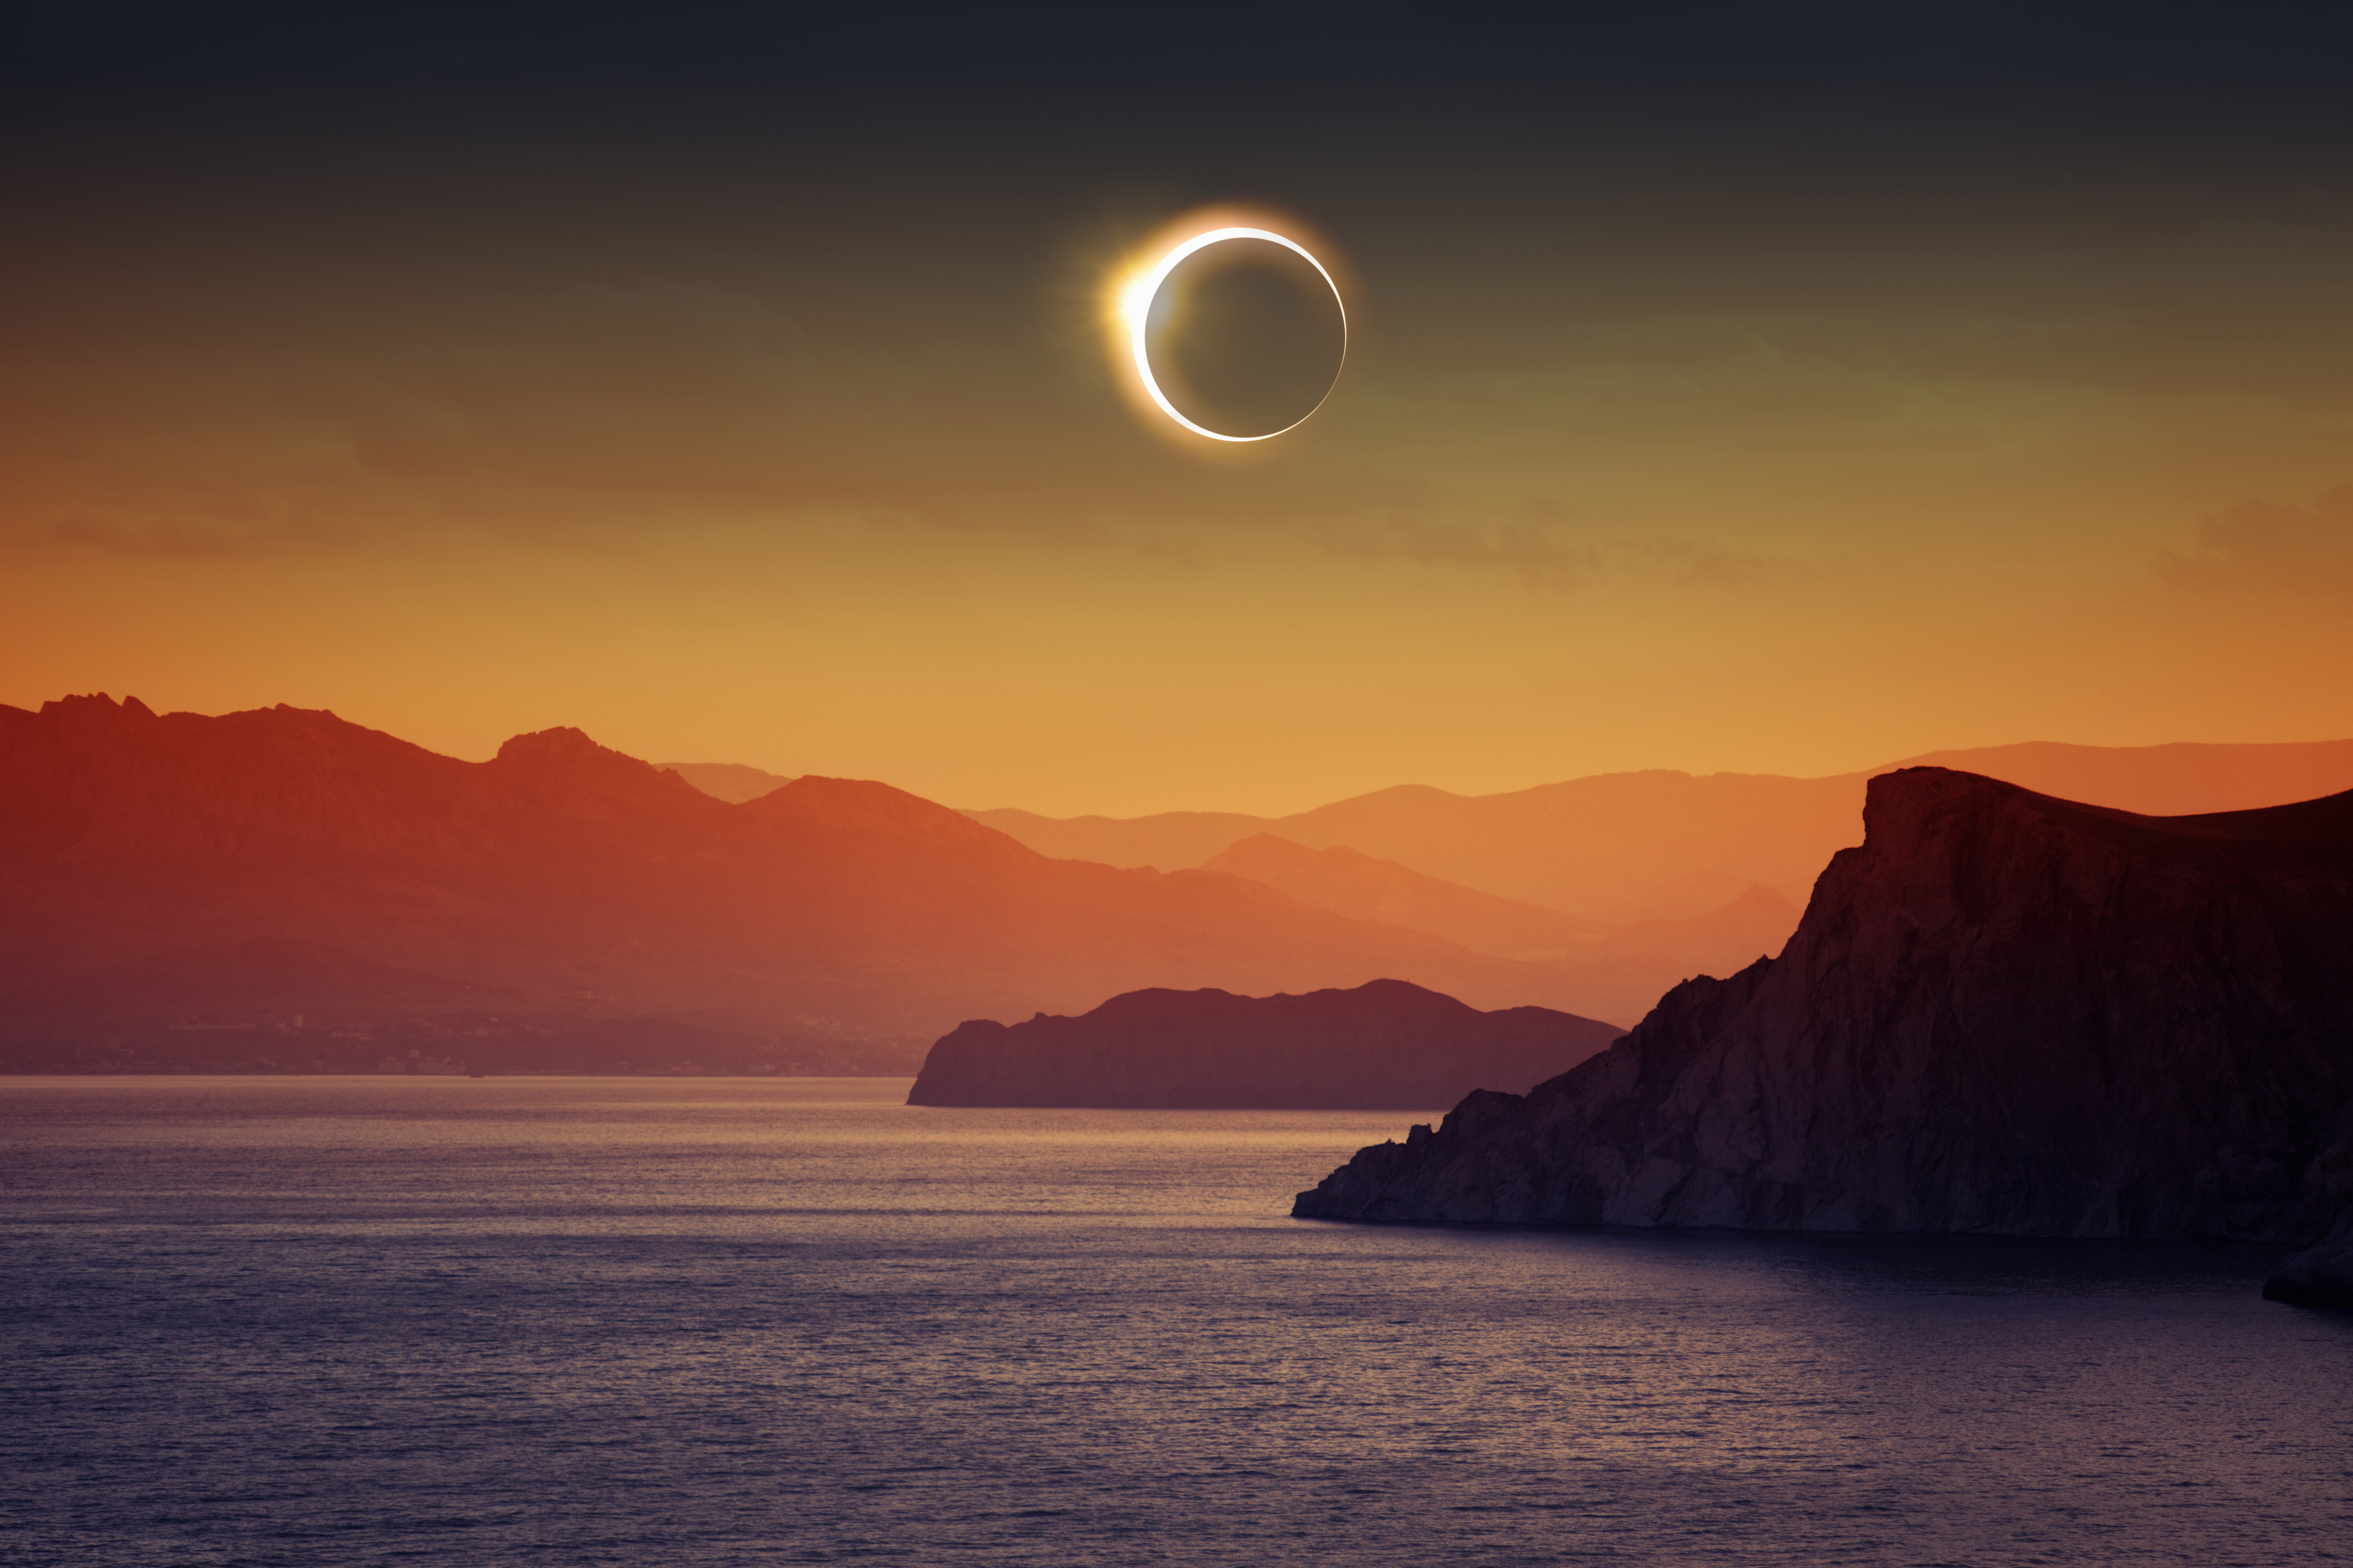 Sky During A Solar Eclipse - HD Wallpaper 